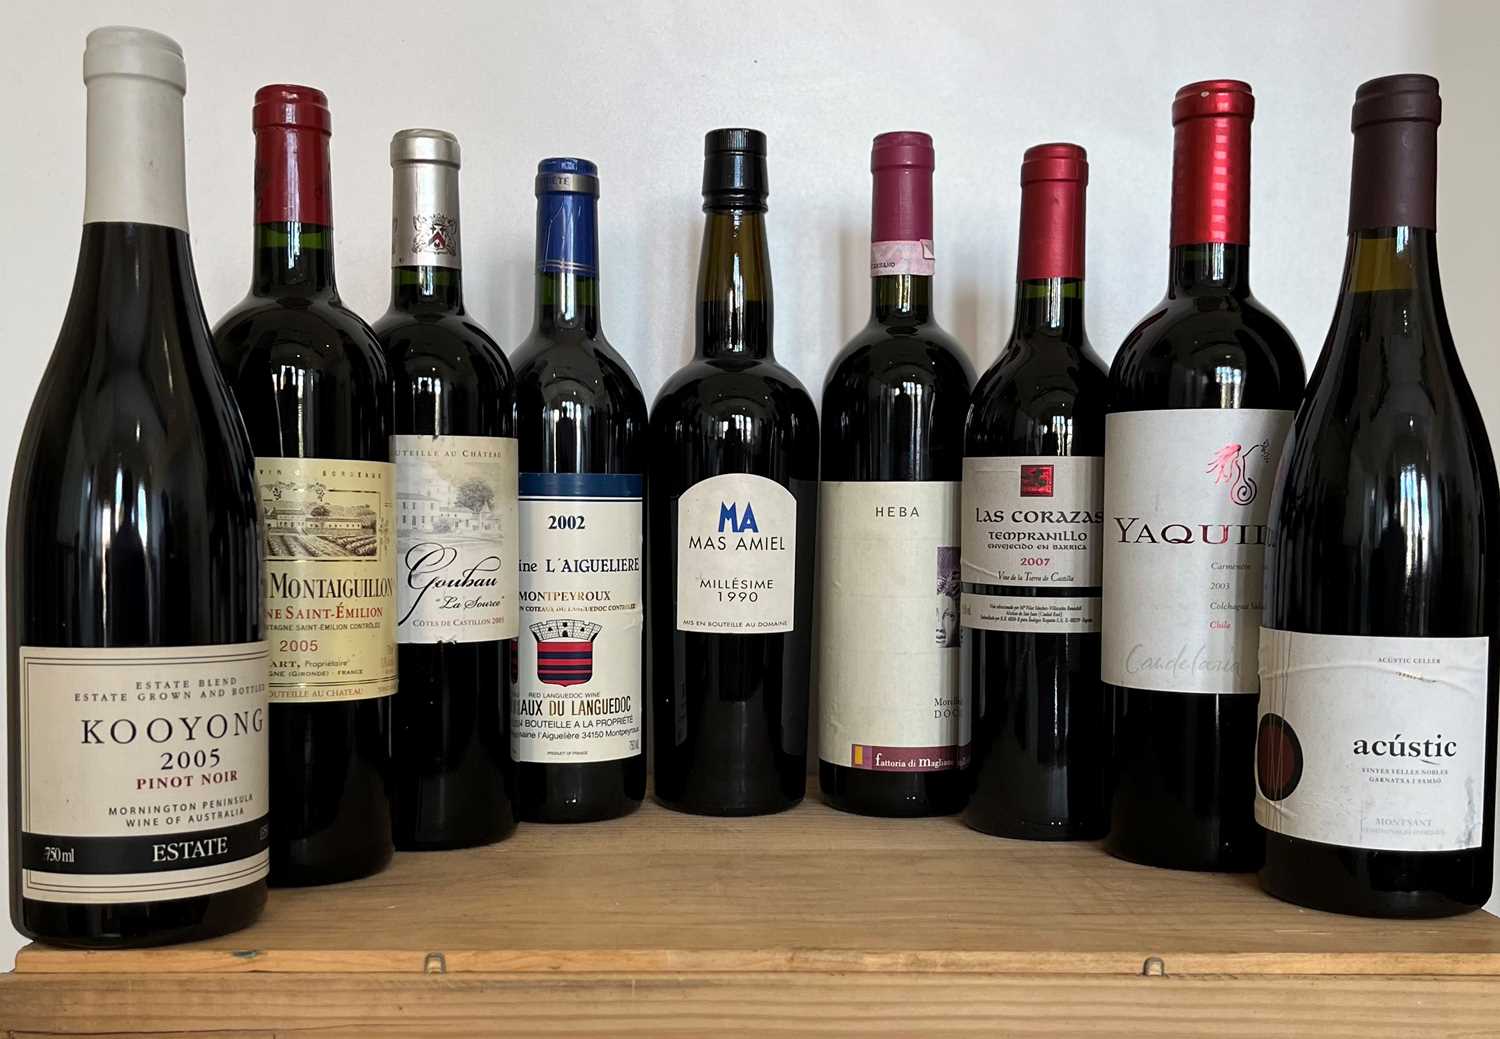 Lot 1 - 9 Bottles Mixed Lot International Very Good Red Drinking wines